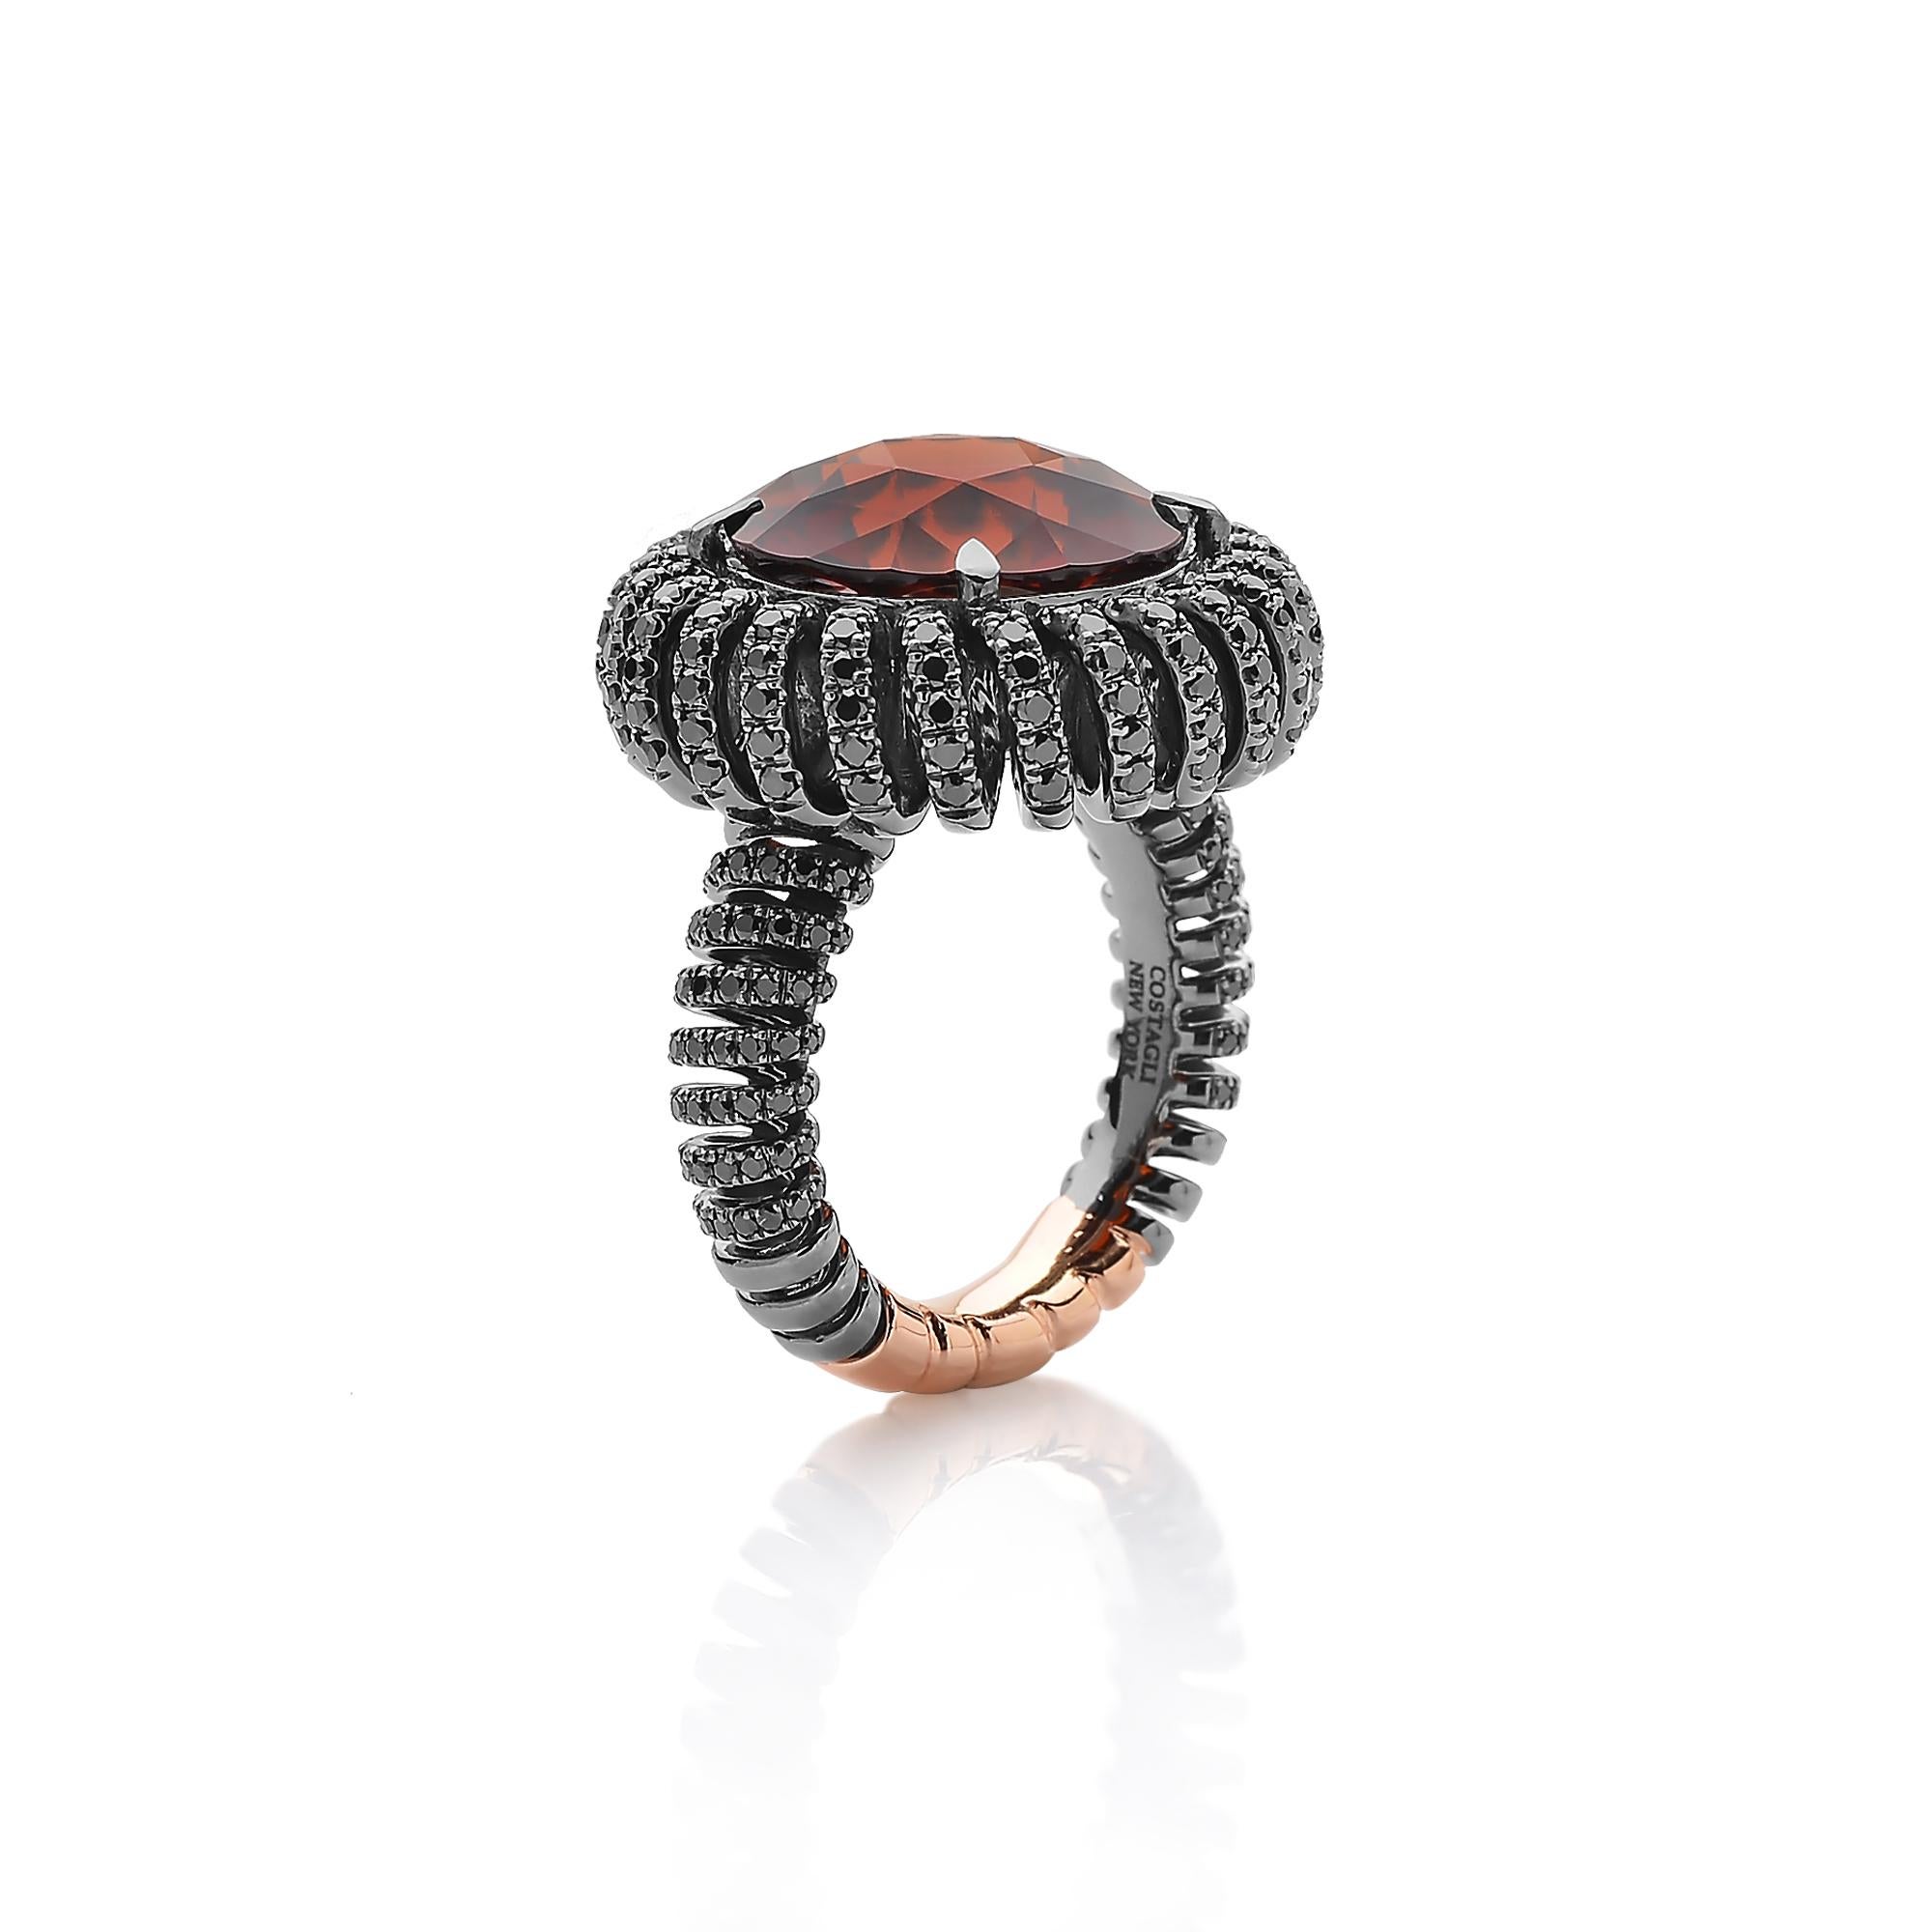 One-of-a-kind round hessonite garnet ring set in a continuous spiraled coil made of 18 karat white gold with black rhodium finish and pave-set black diamond detailing. 

The beauty is in the details - from the combination of hues, the cut of the